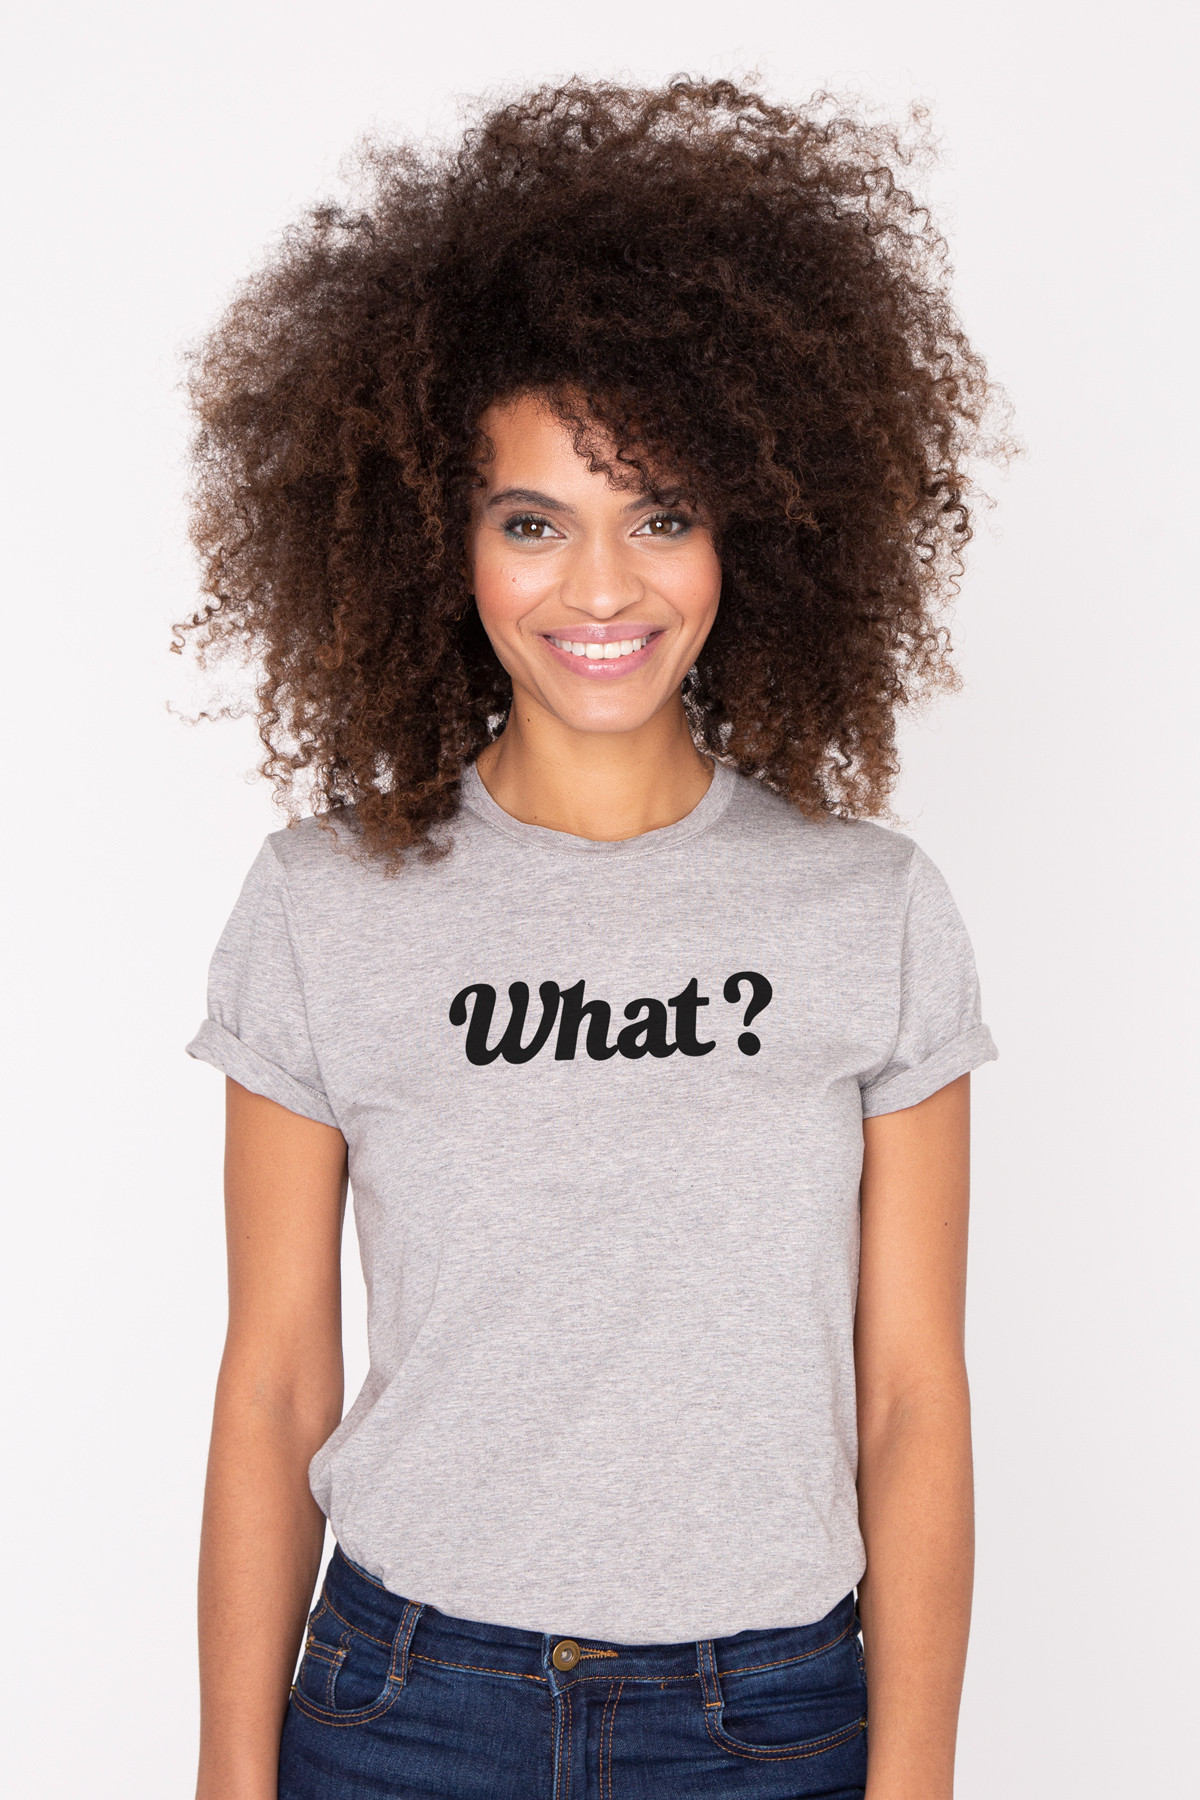 Photo de T-SHIRTS COL ROND Tshirt WHAT ? chez French Disorder